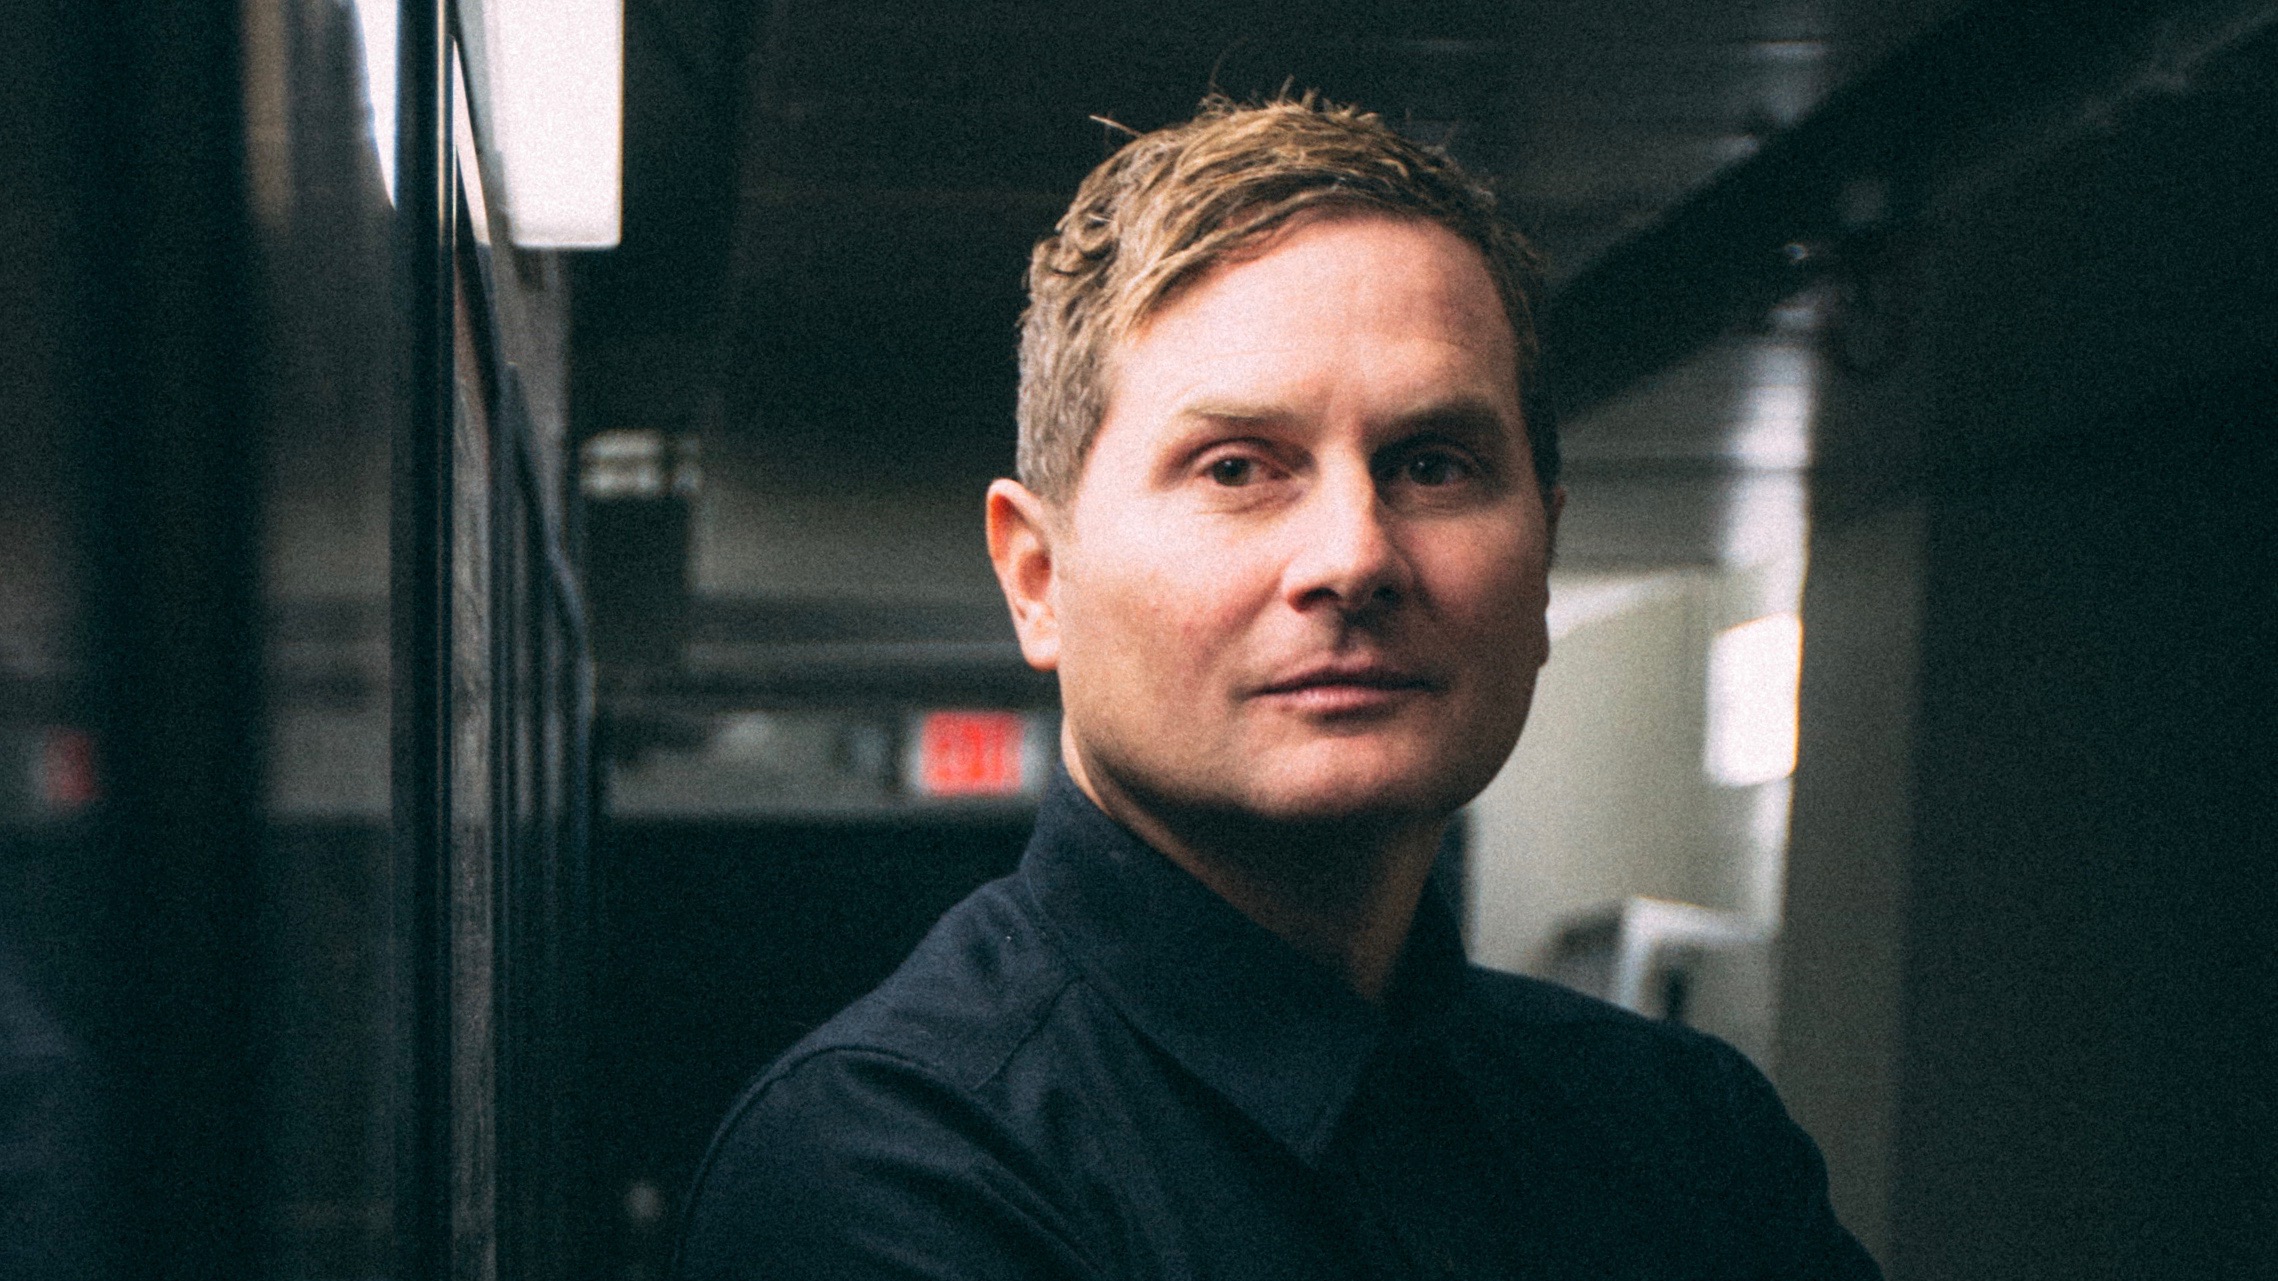 When Faith Speaks: An interview with global thought leader Rob Bell